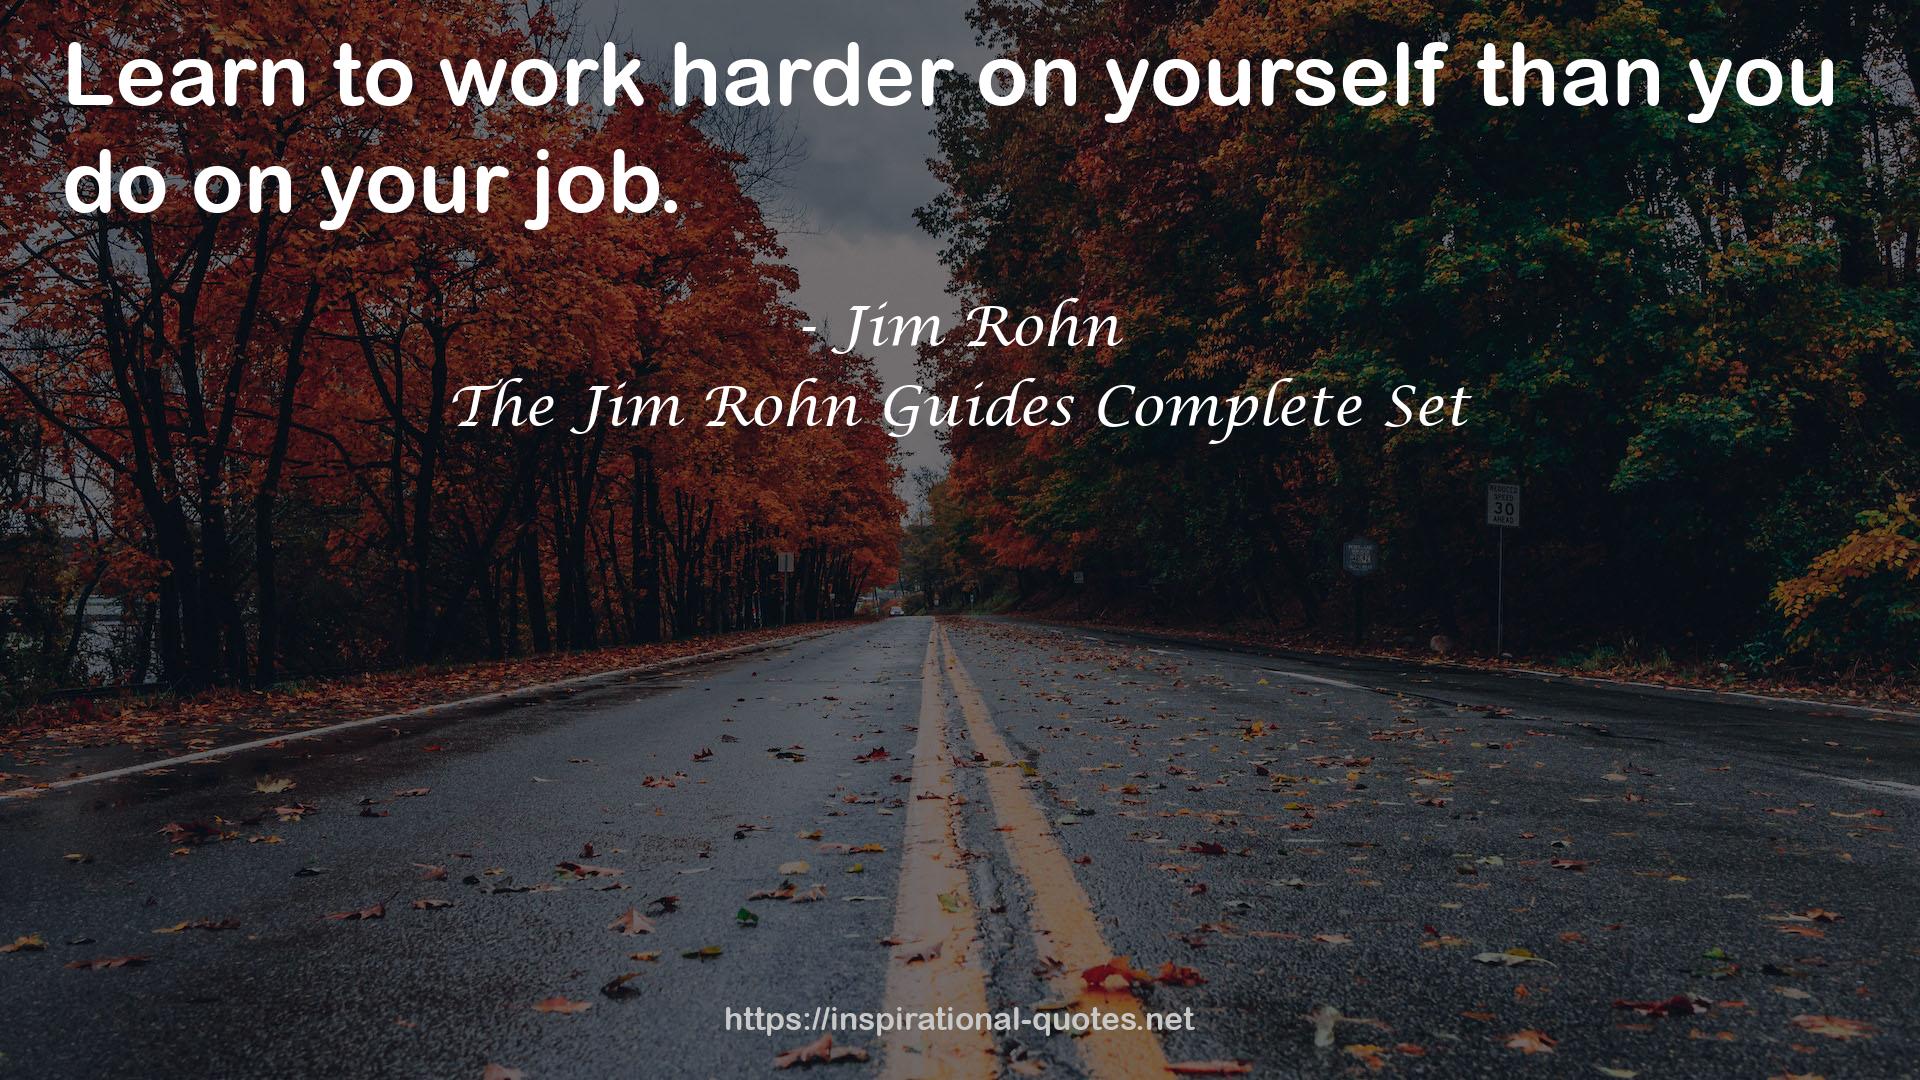 The Jim Rohn Guides Complete Set QUOTES